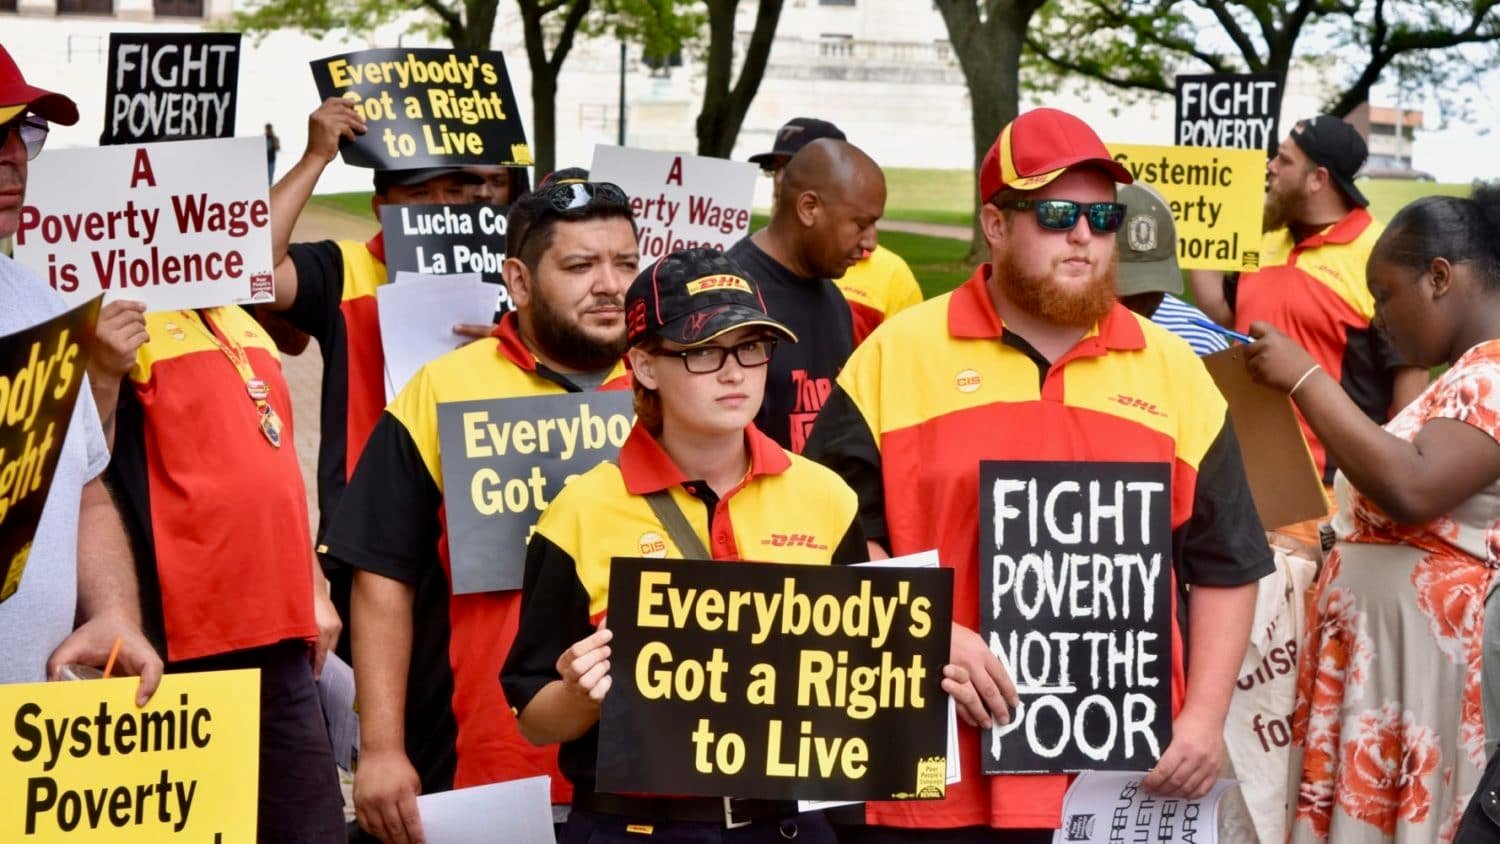 Week five of the RI Poor People’s Campaign tackles education and jobs, begins to up the ante